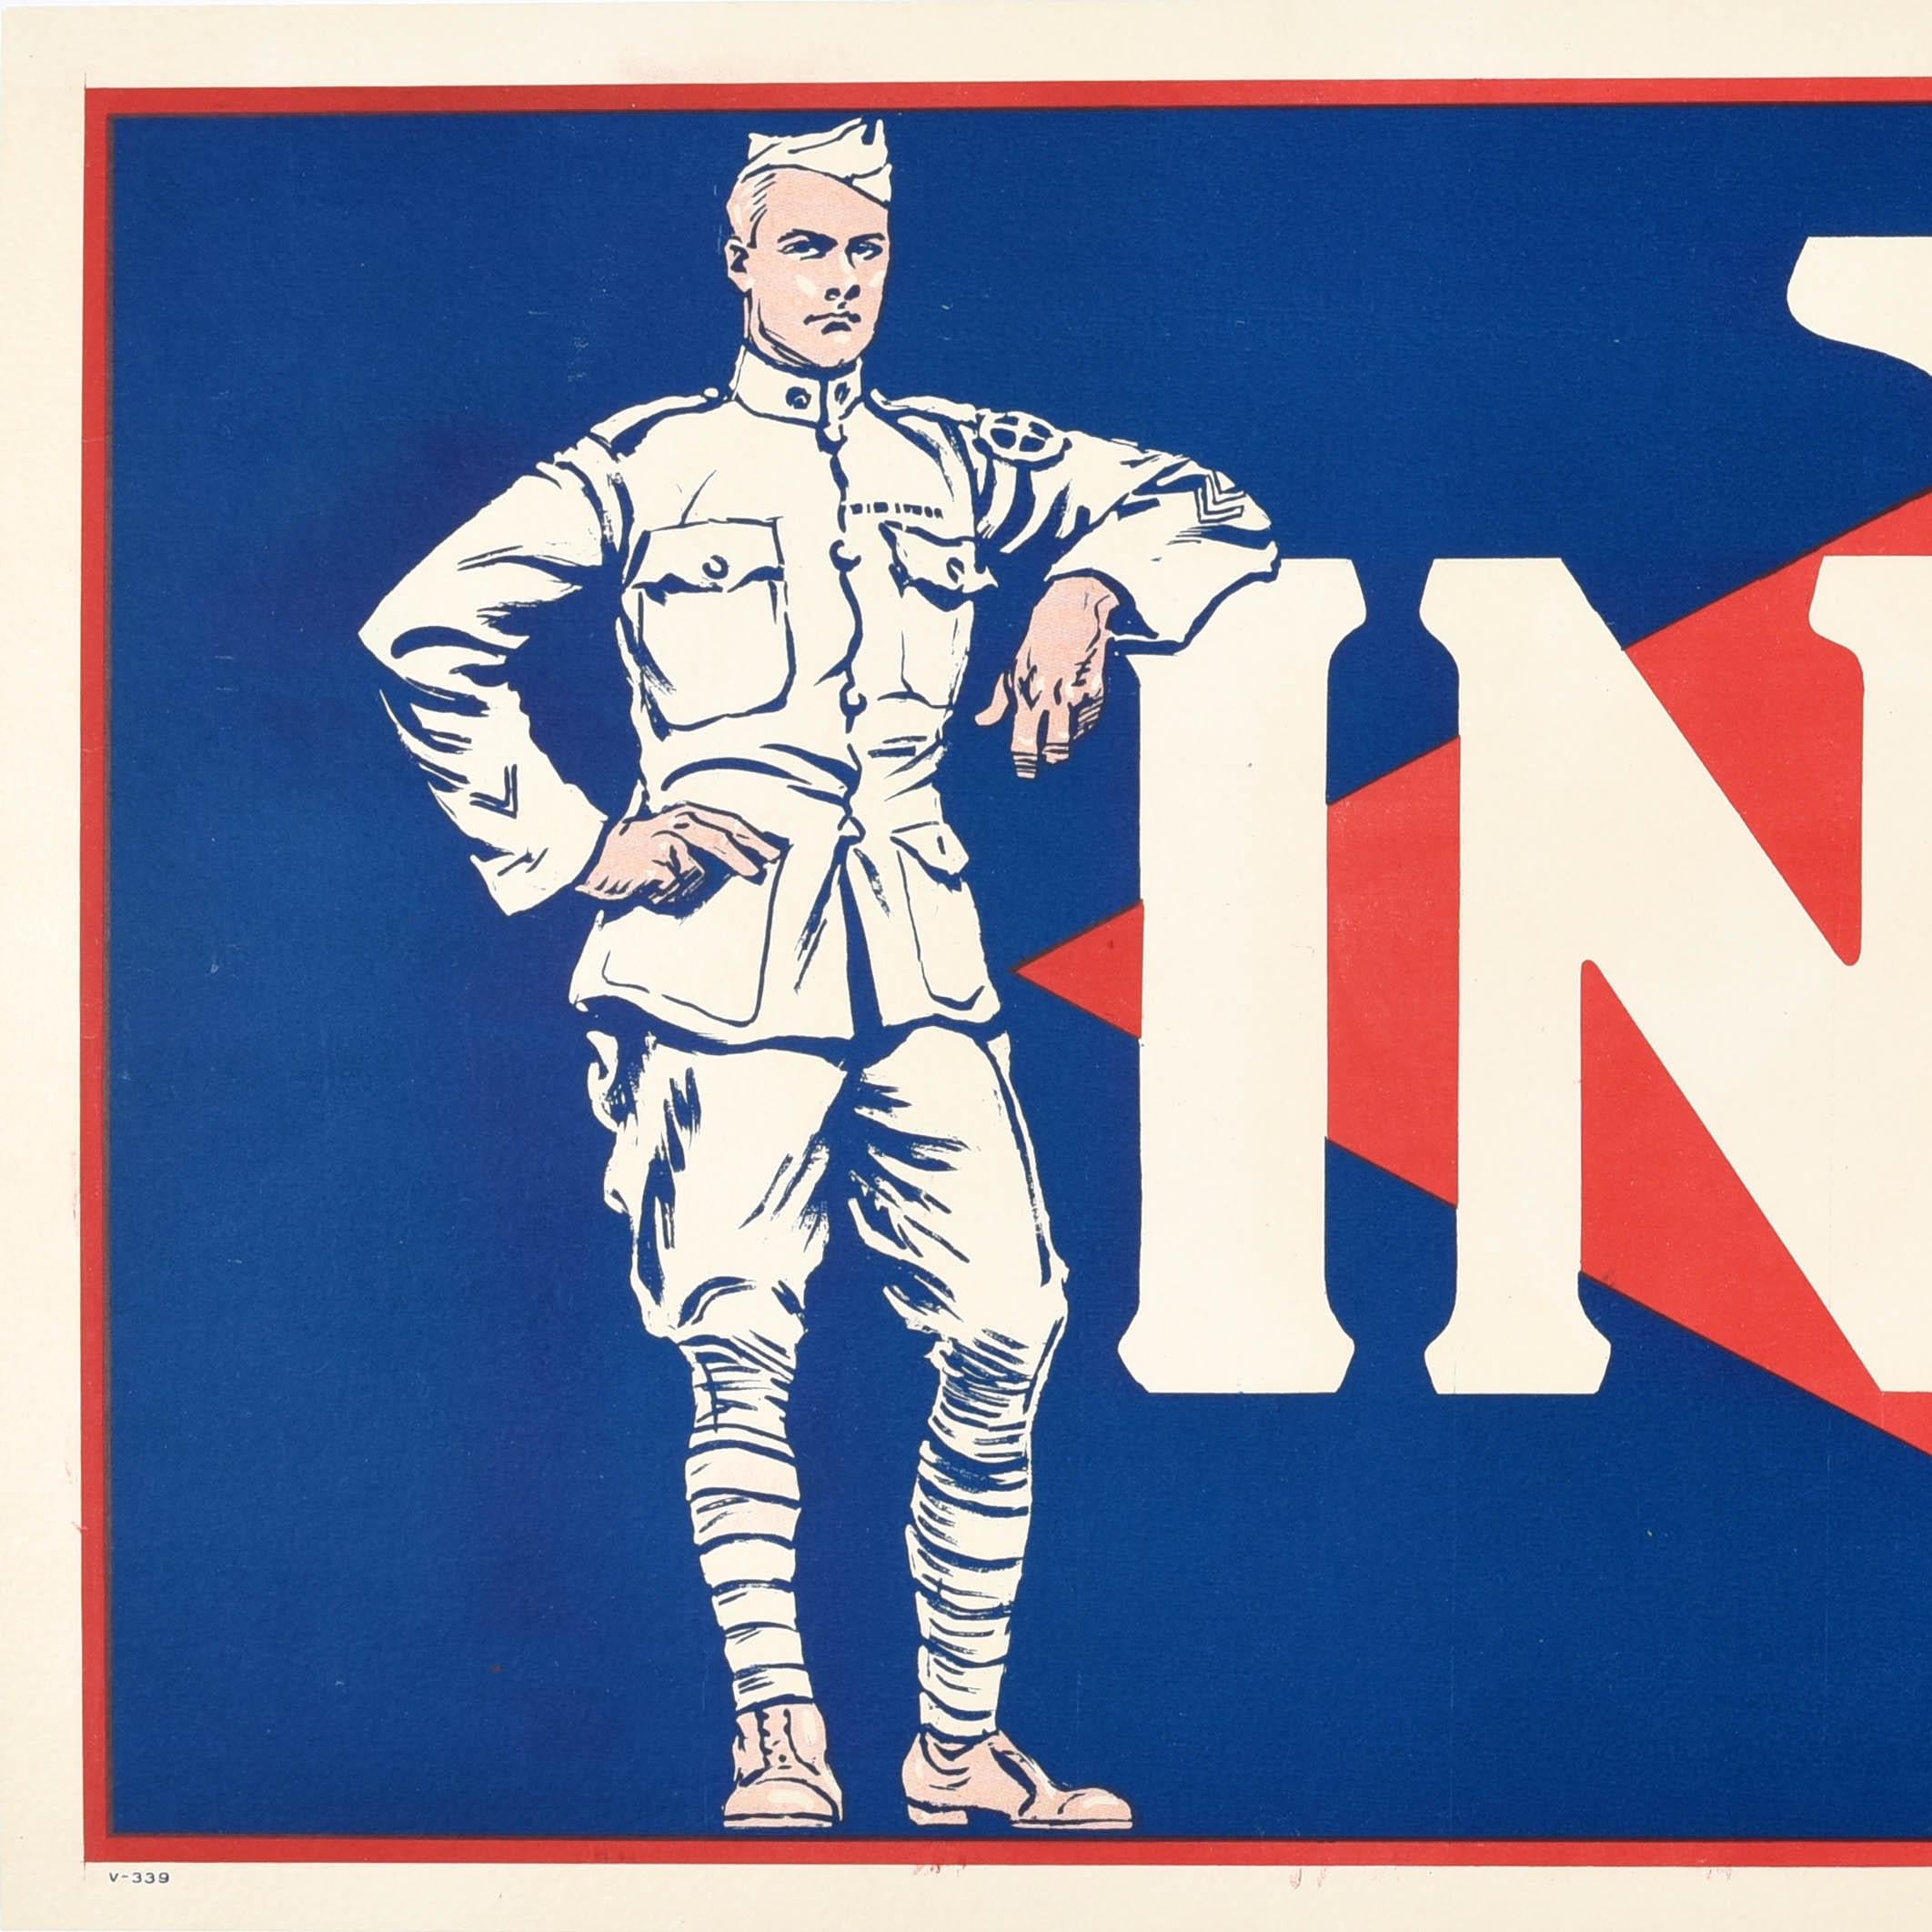 Original antique World War One poster - Invest - featuring a great design depicting a soldier and a sailor in military uniform leaning on the I and T of the title text in bold white lettering with a V for Victory on a red and blue background.